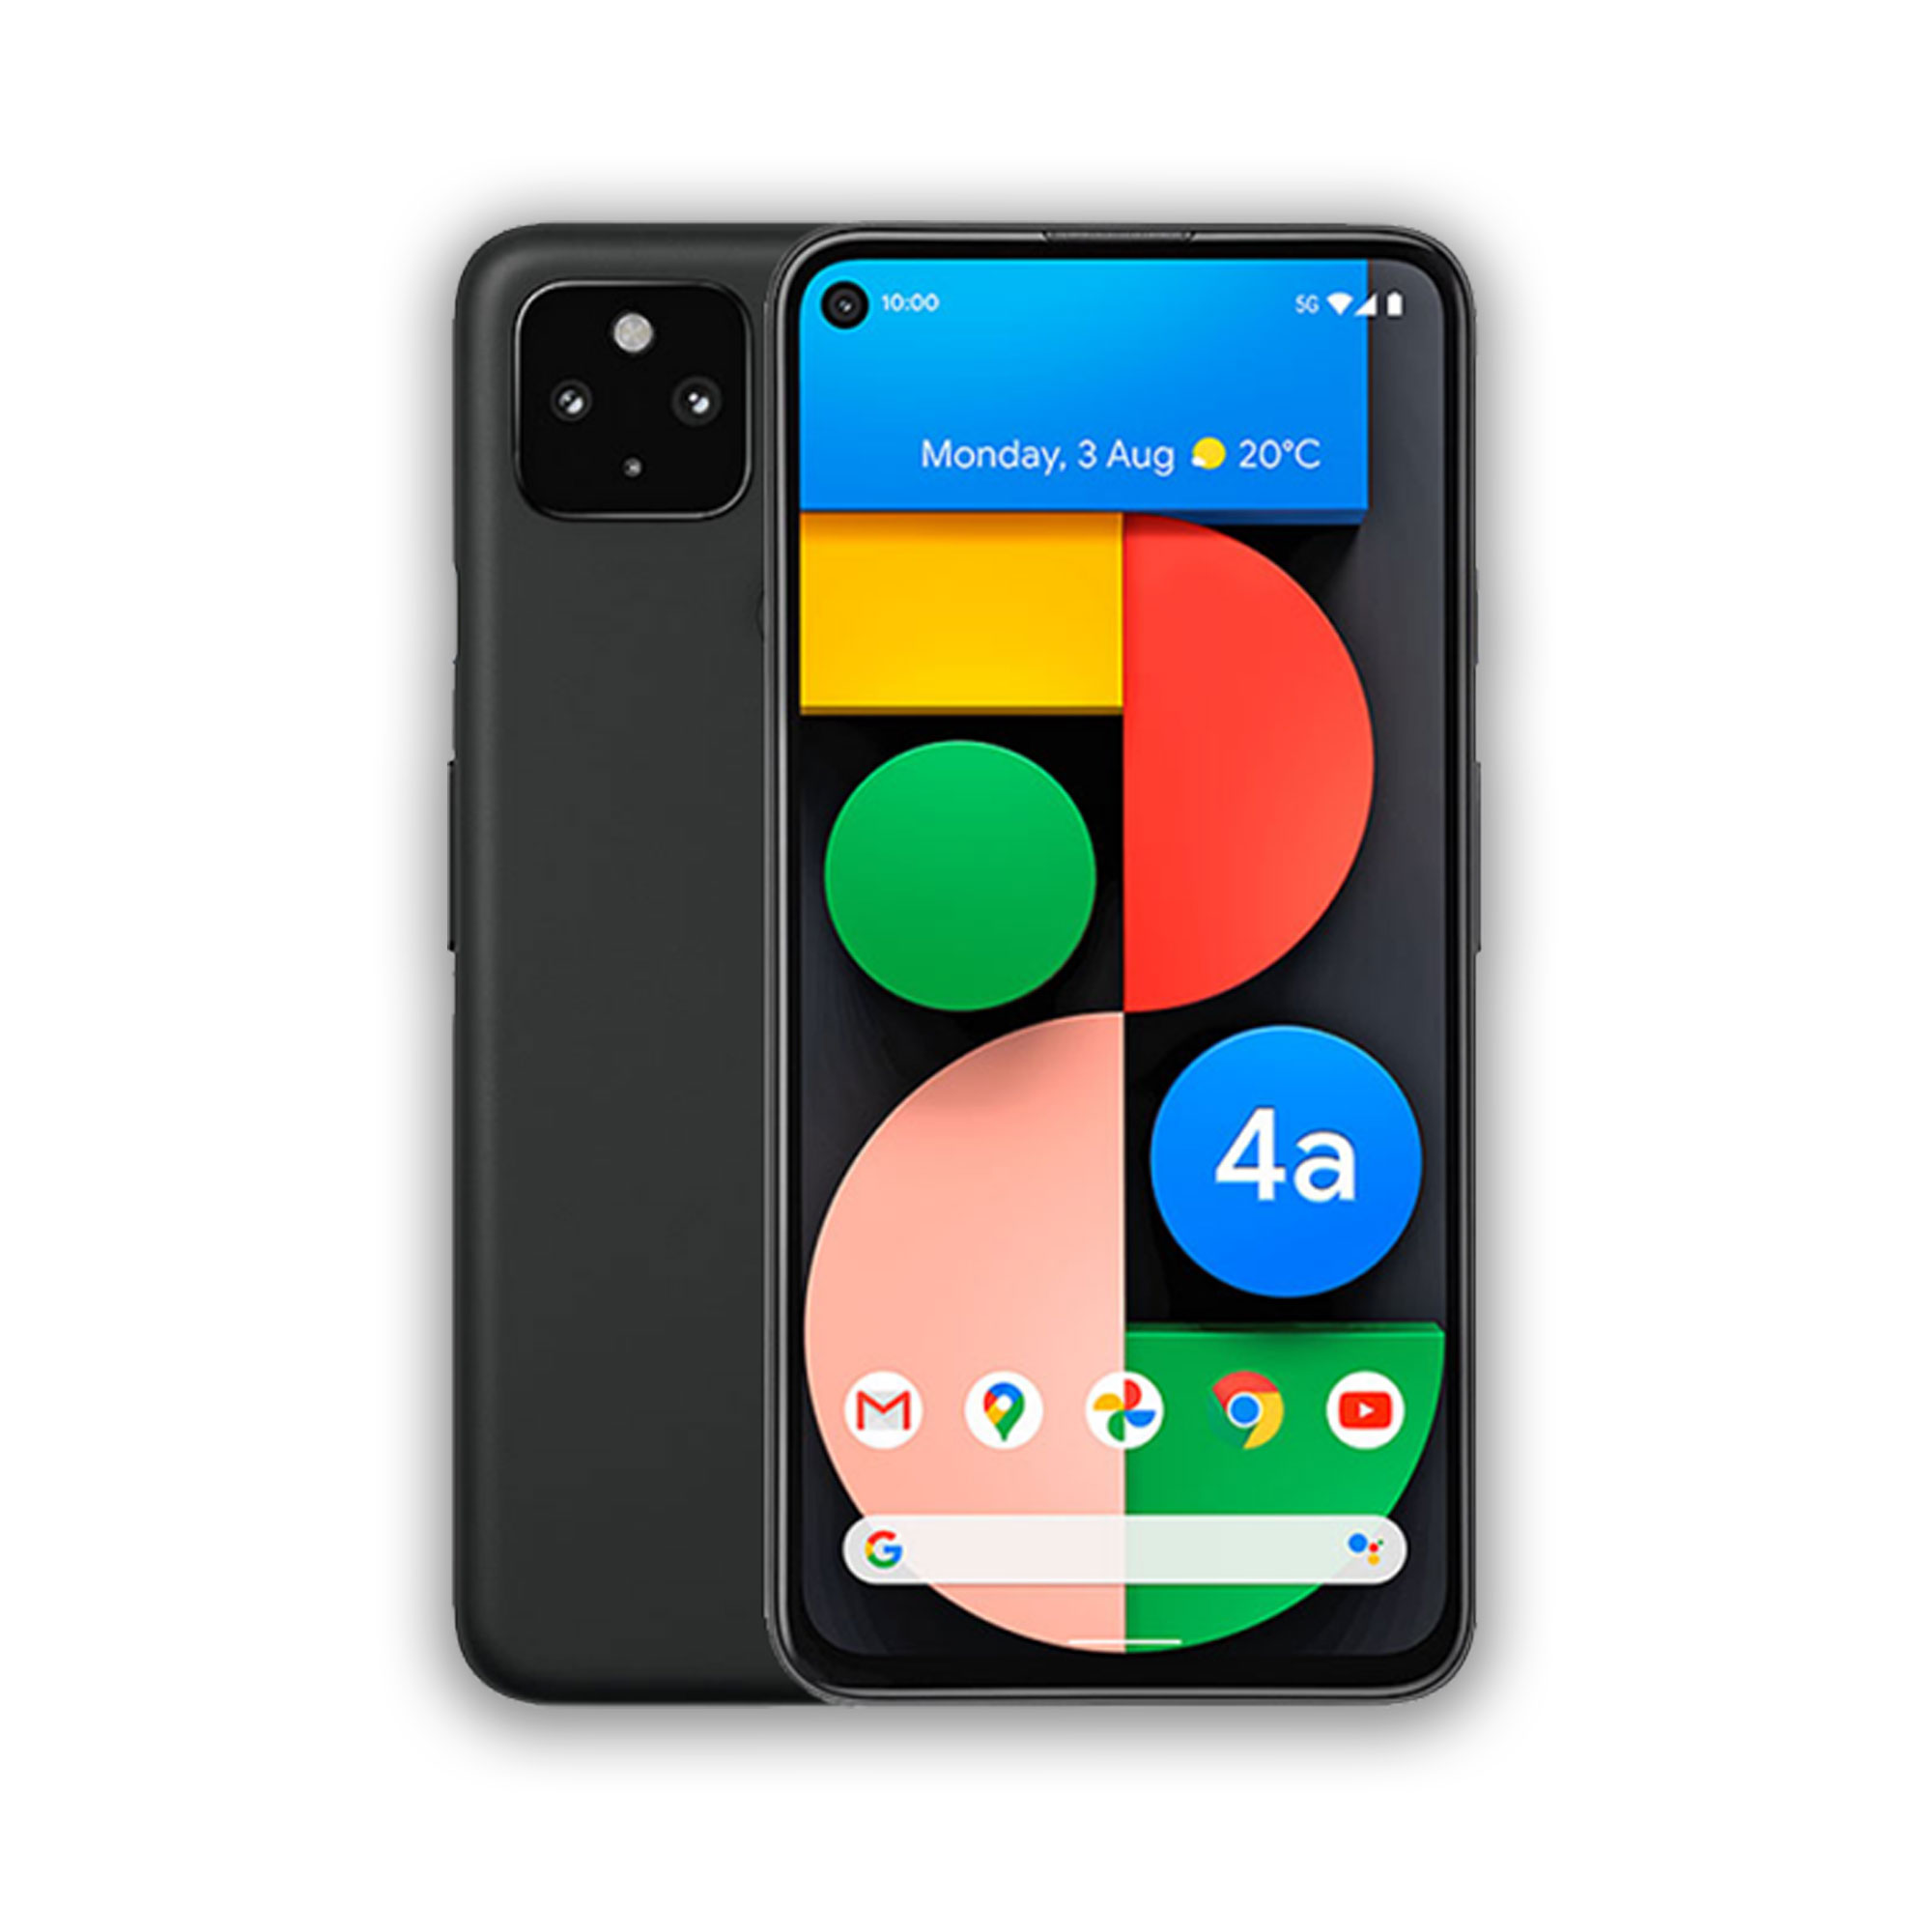 Managing Open Apps On Google Pixel 4: A User Guide